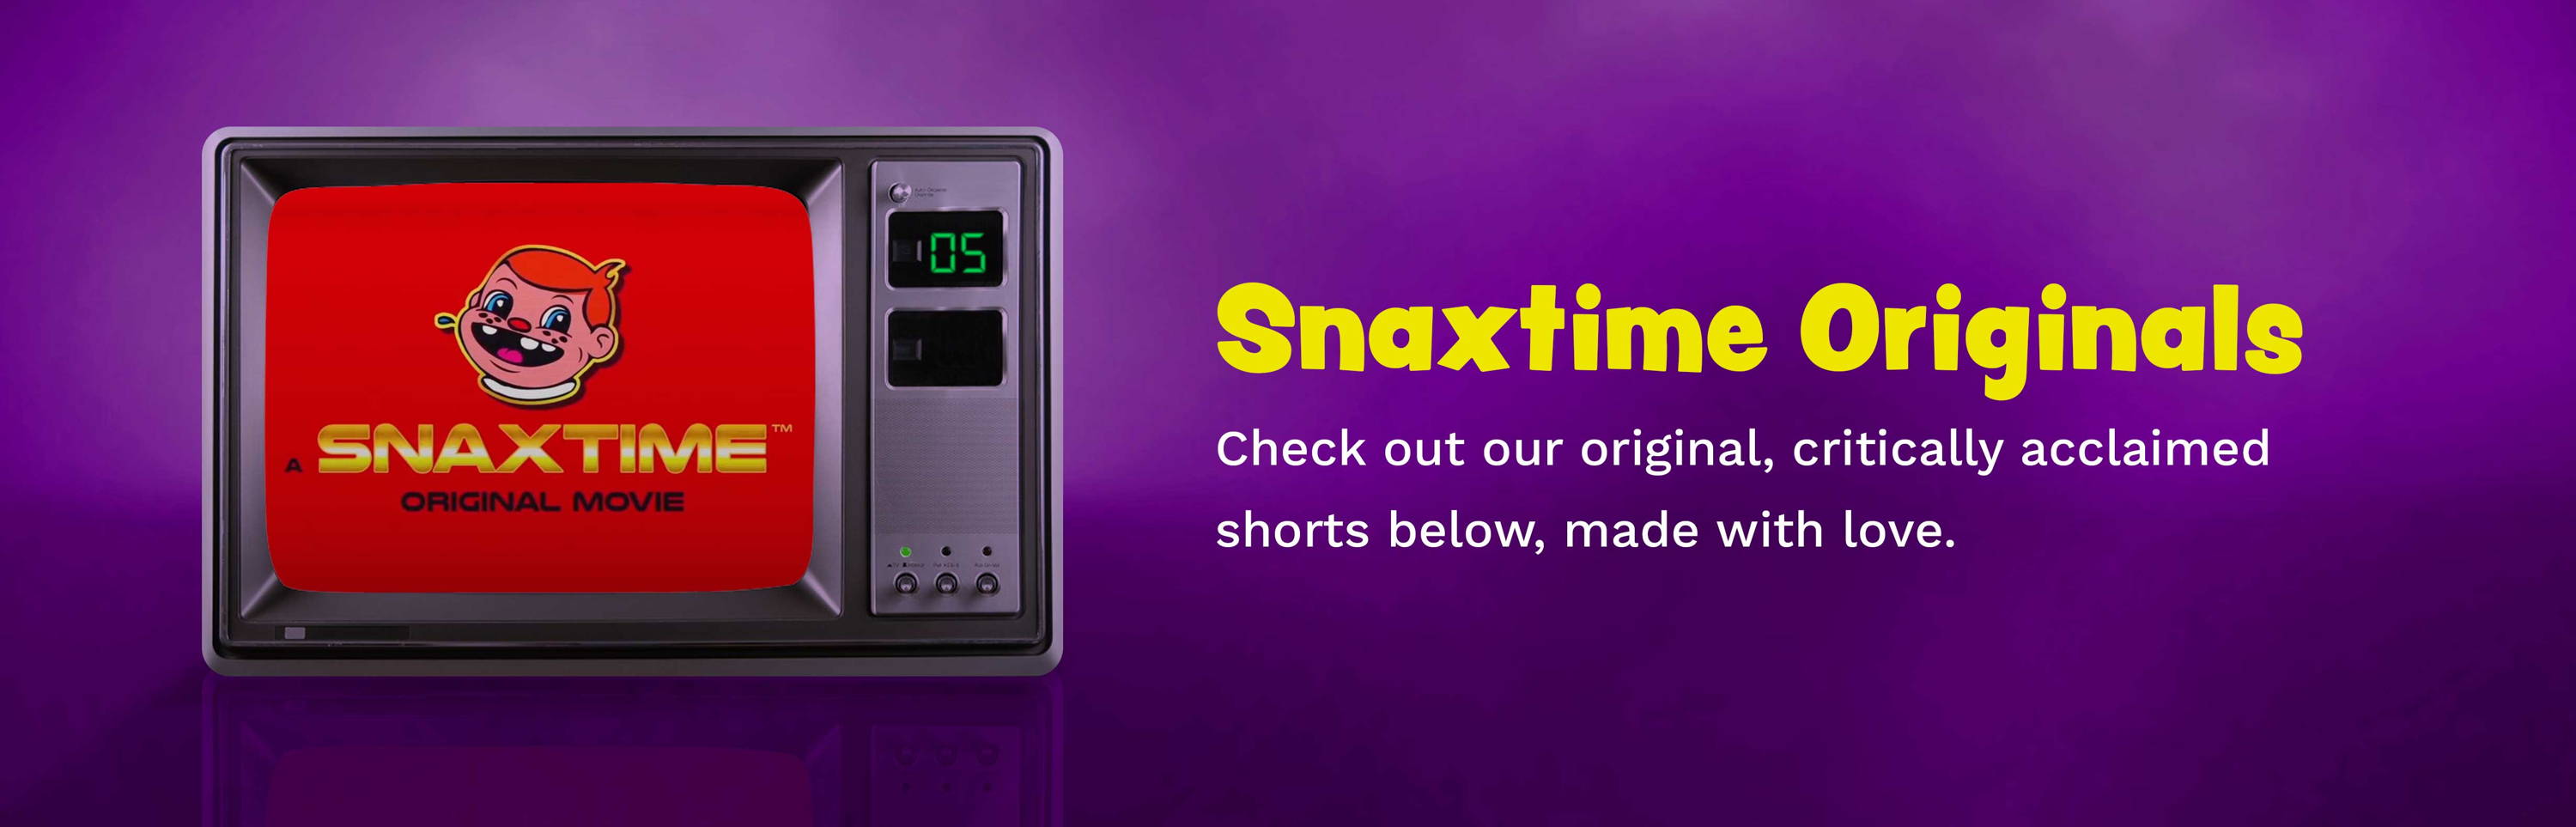 Snaxtime Originals | Check out our original, critically acclaimed shorts below, made with love.